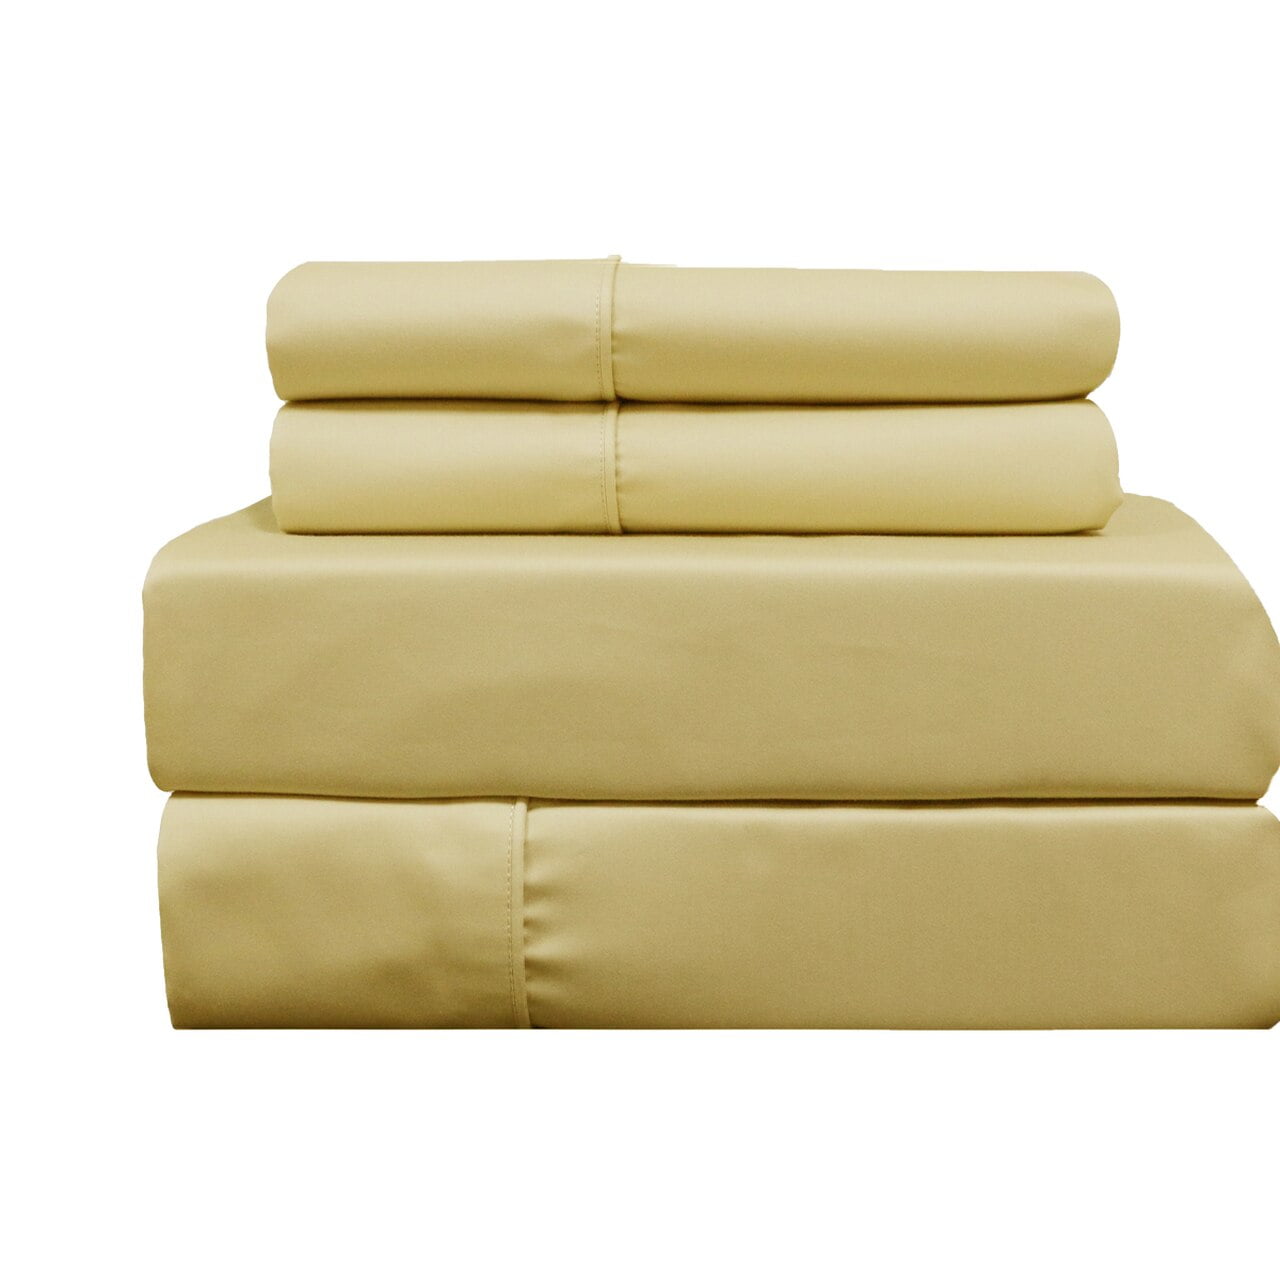 Luxury Soft Solid Attached Waterbed Sheet Set 650 TC Cotton Blend Deep Pocket 